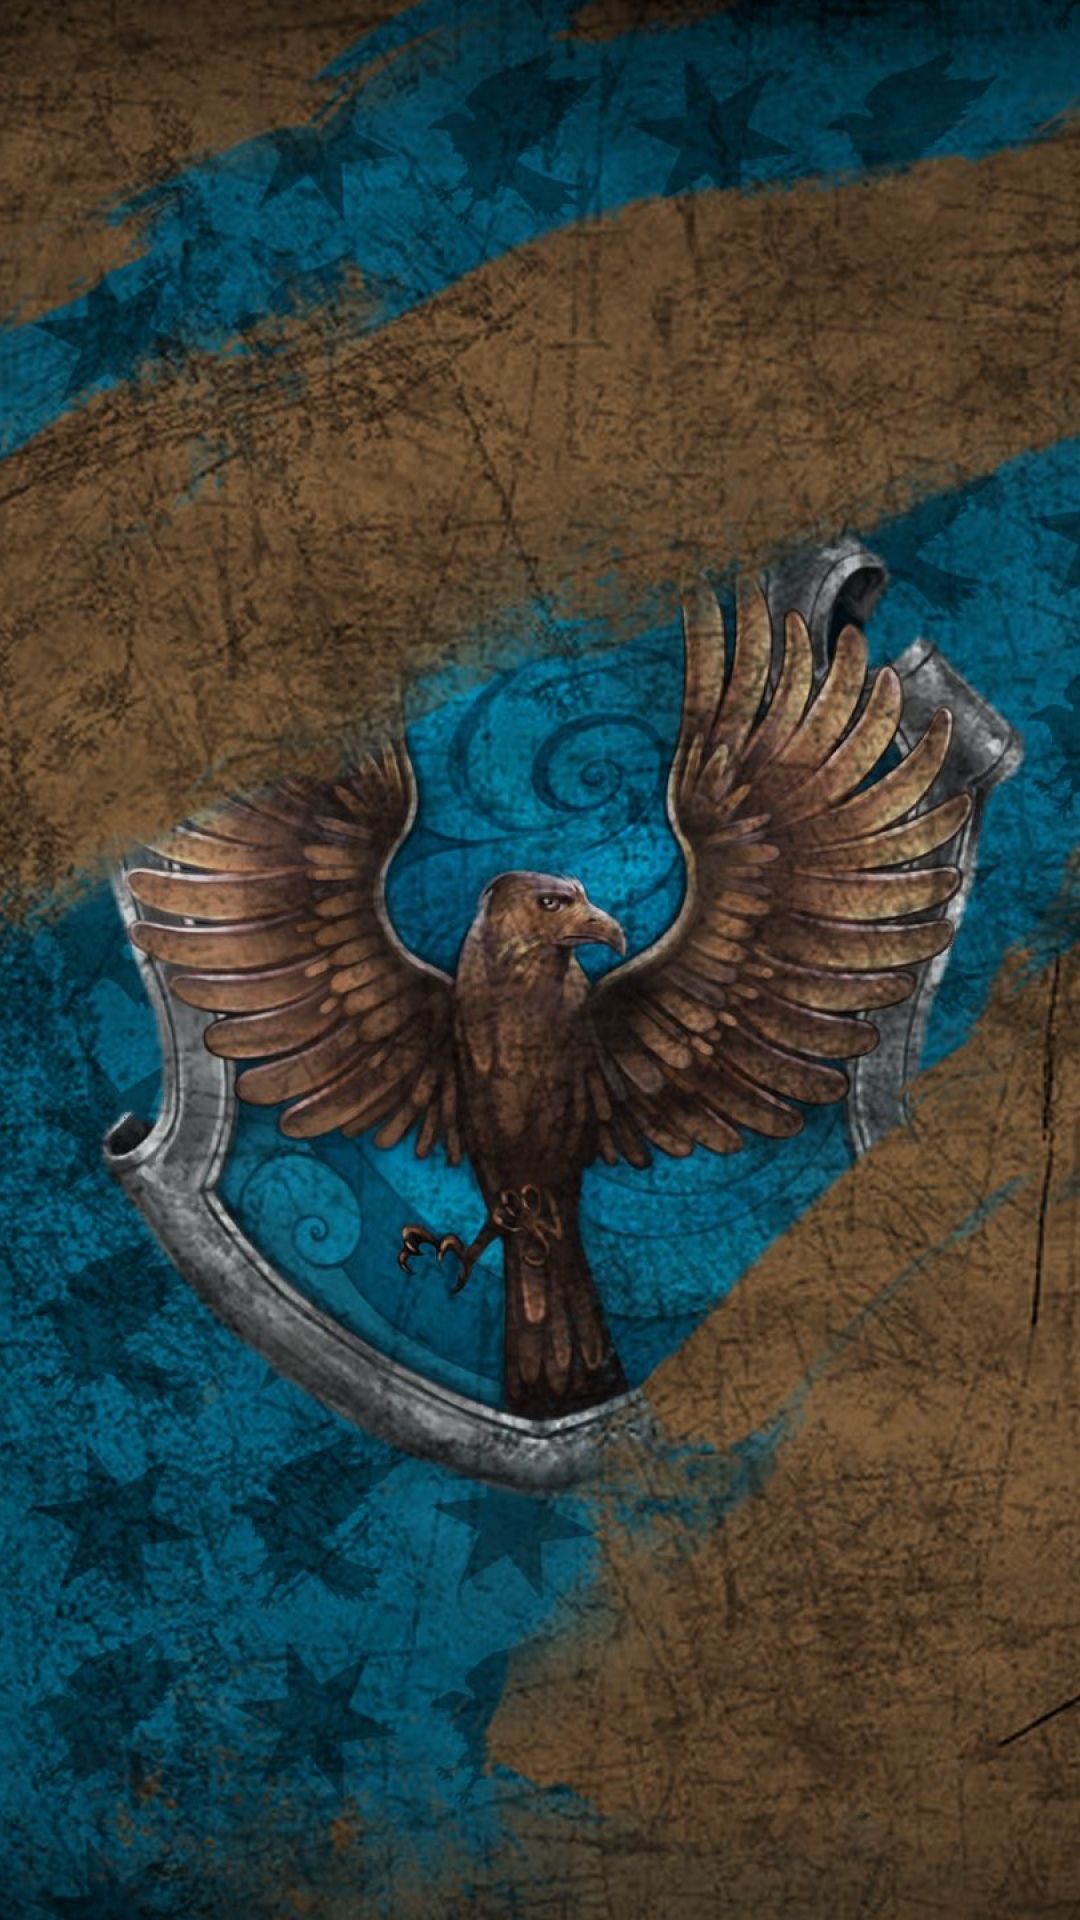 Ravenclaw Iphone Wallpapers